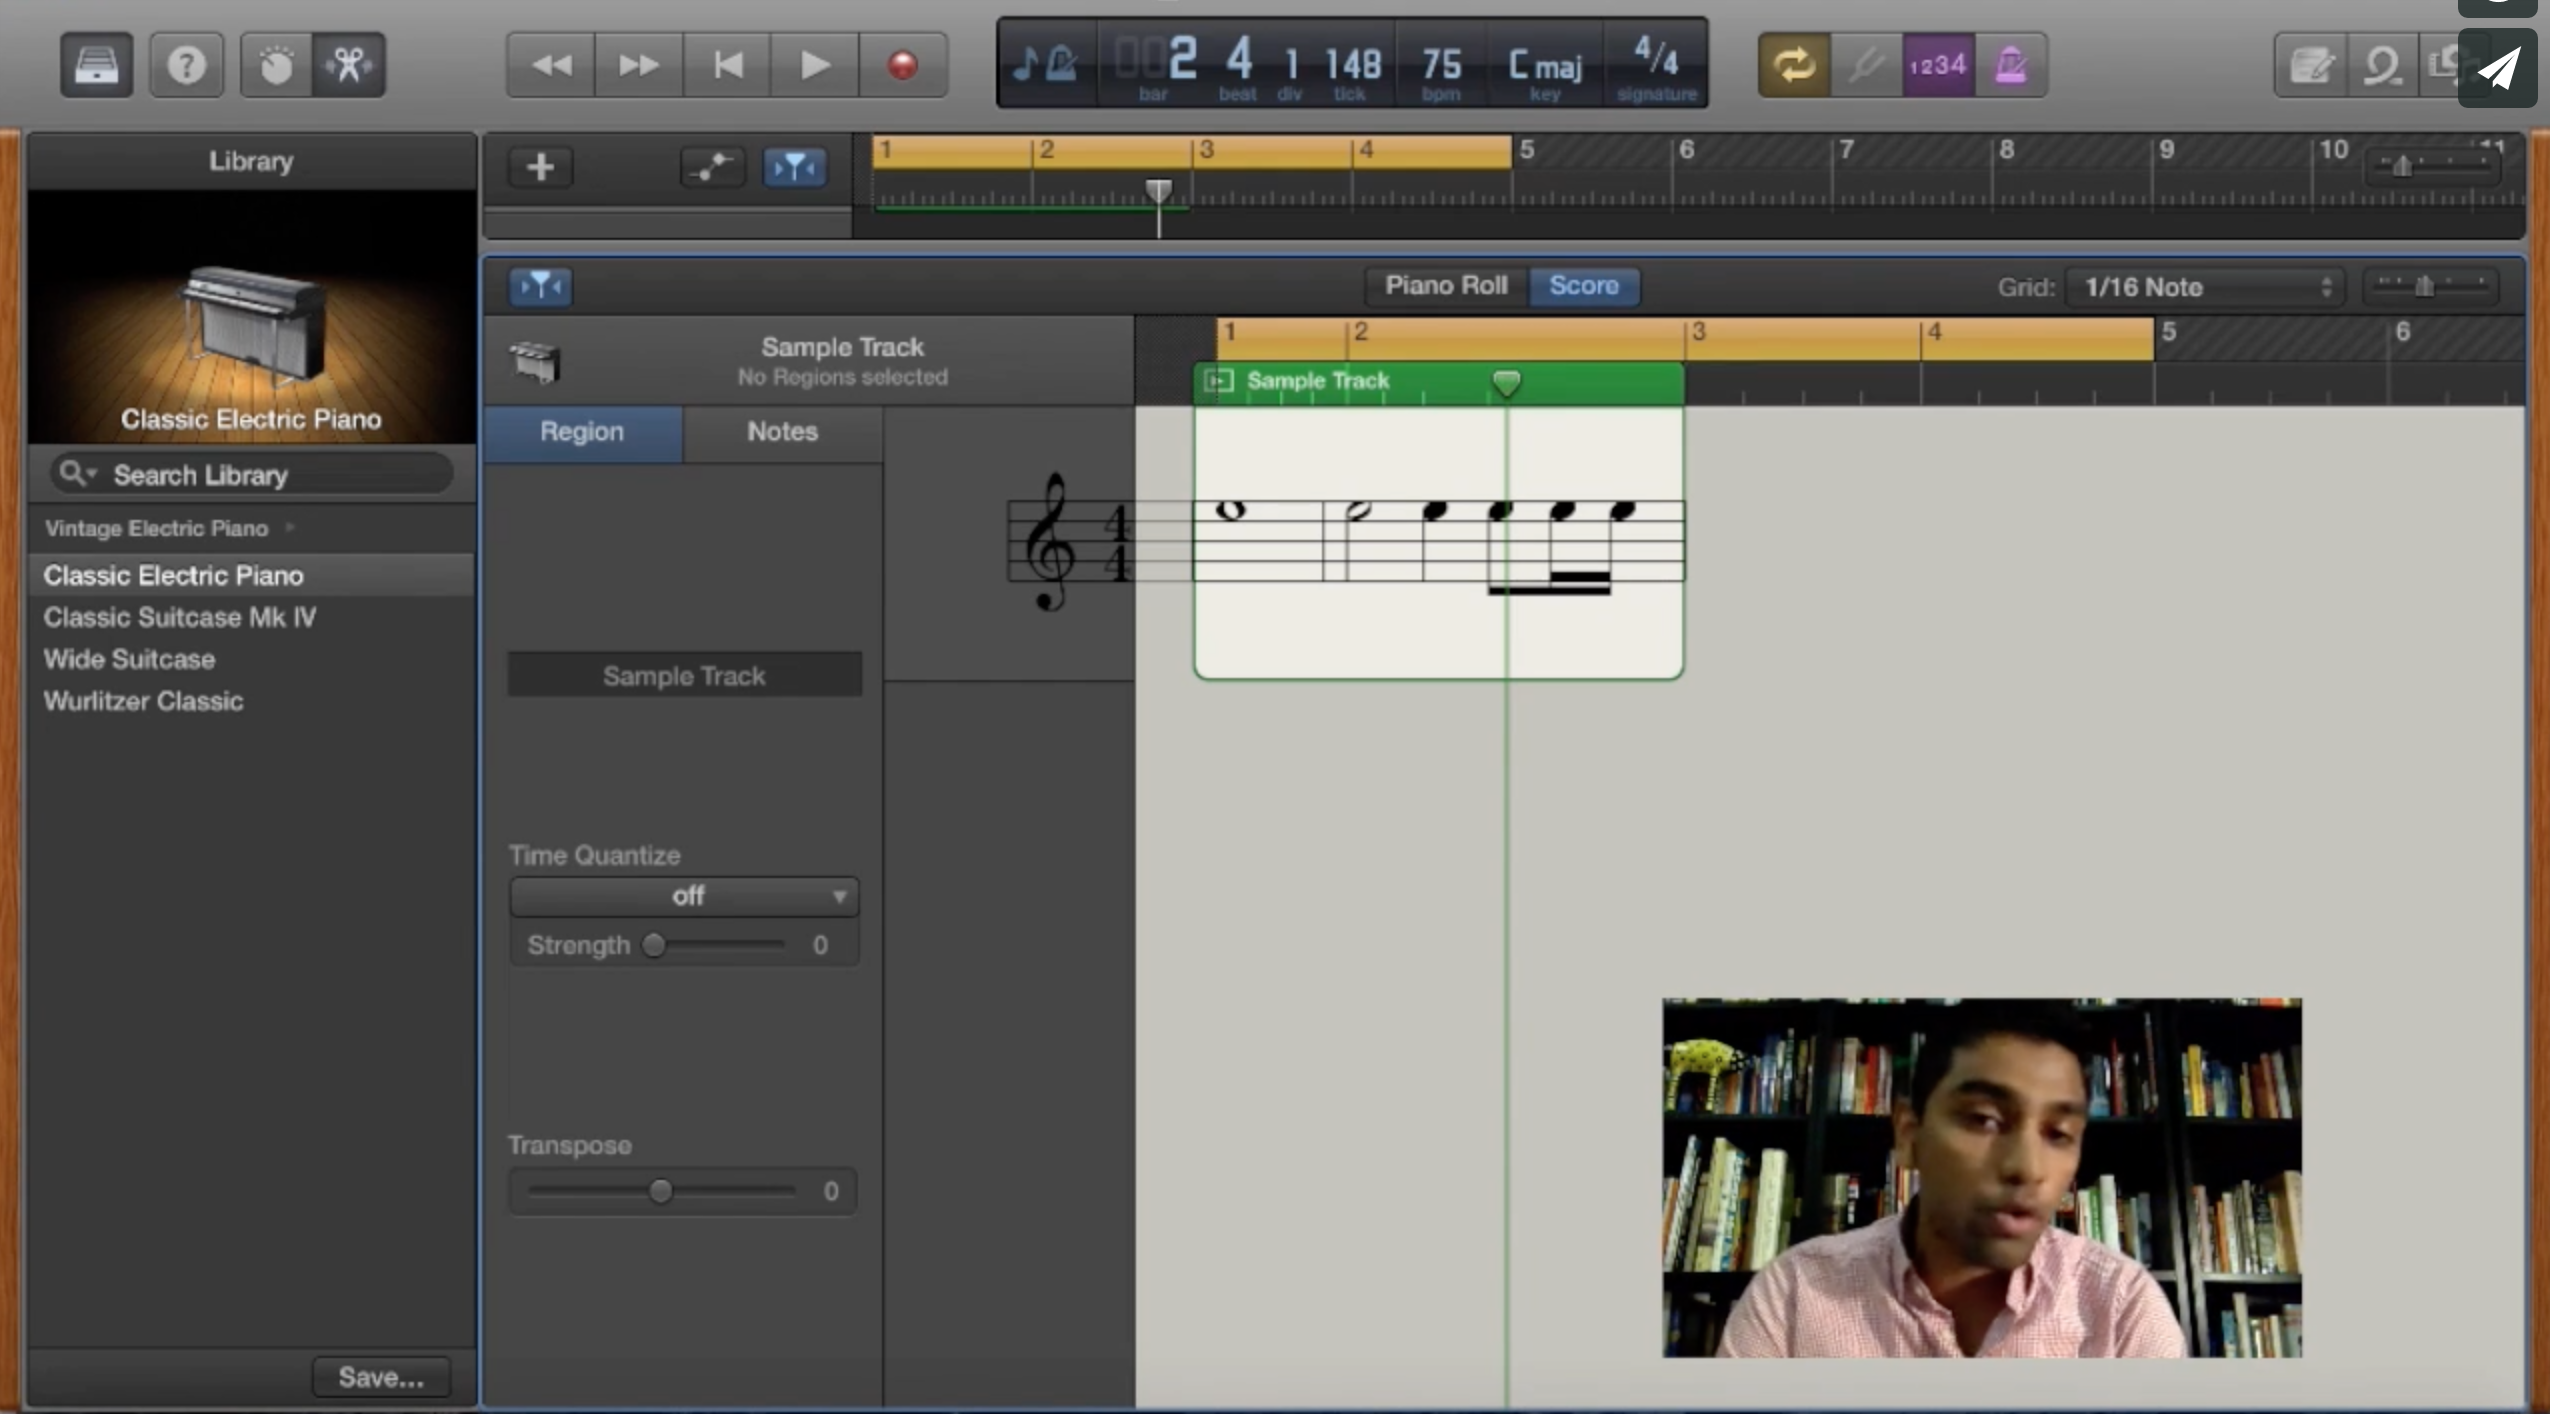  Percussion-Loop Percussion loops for Indian Music using GarageBand  